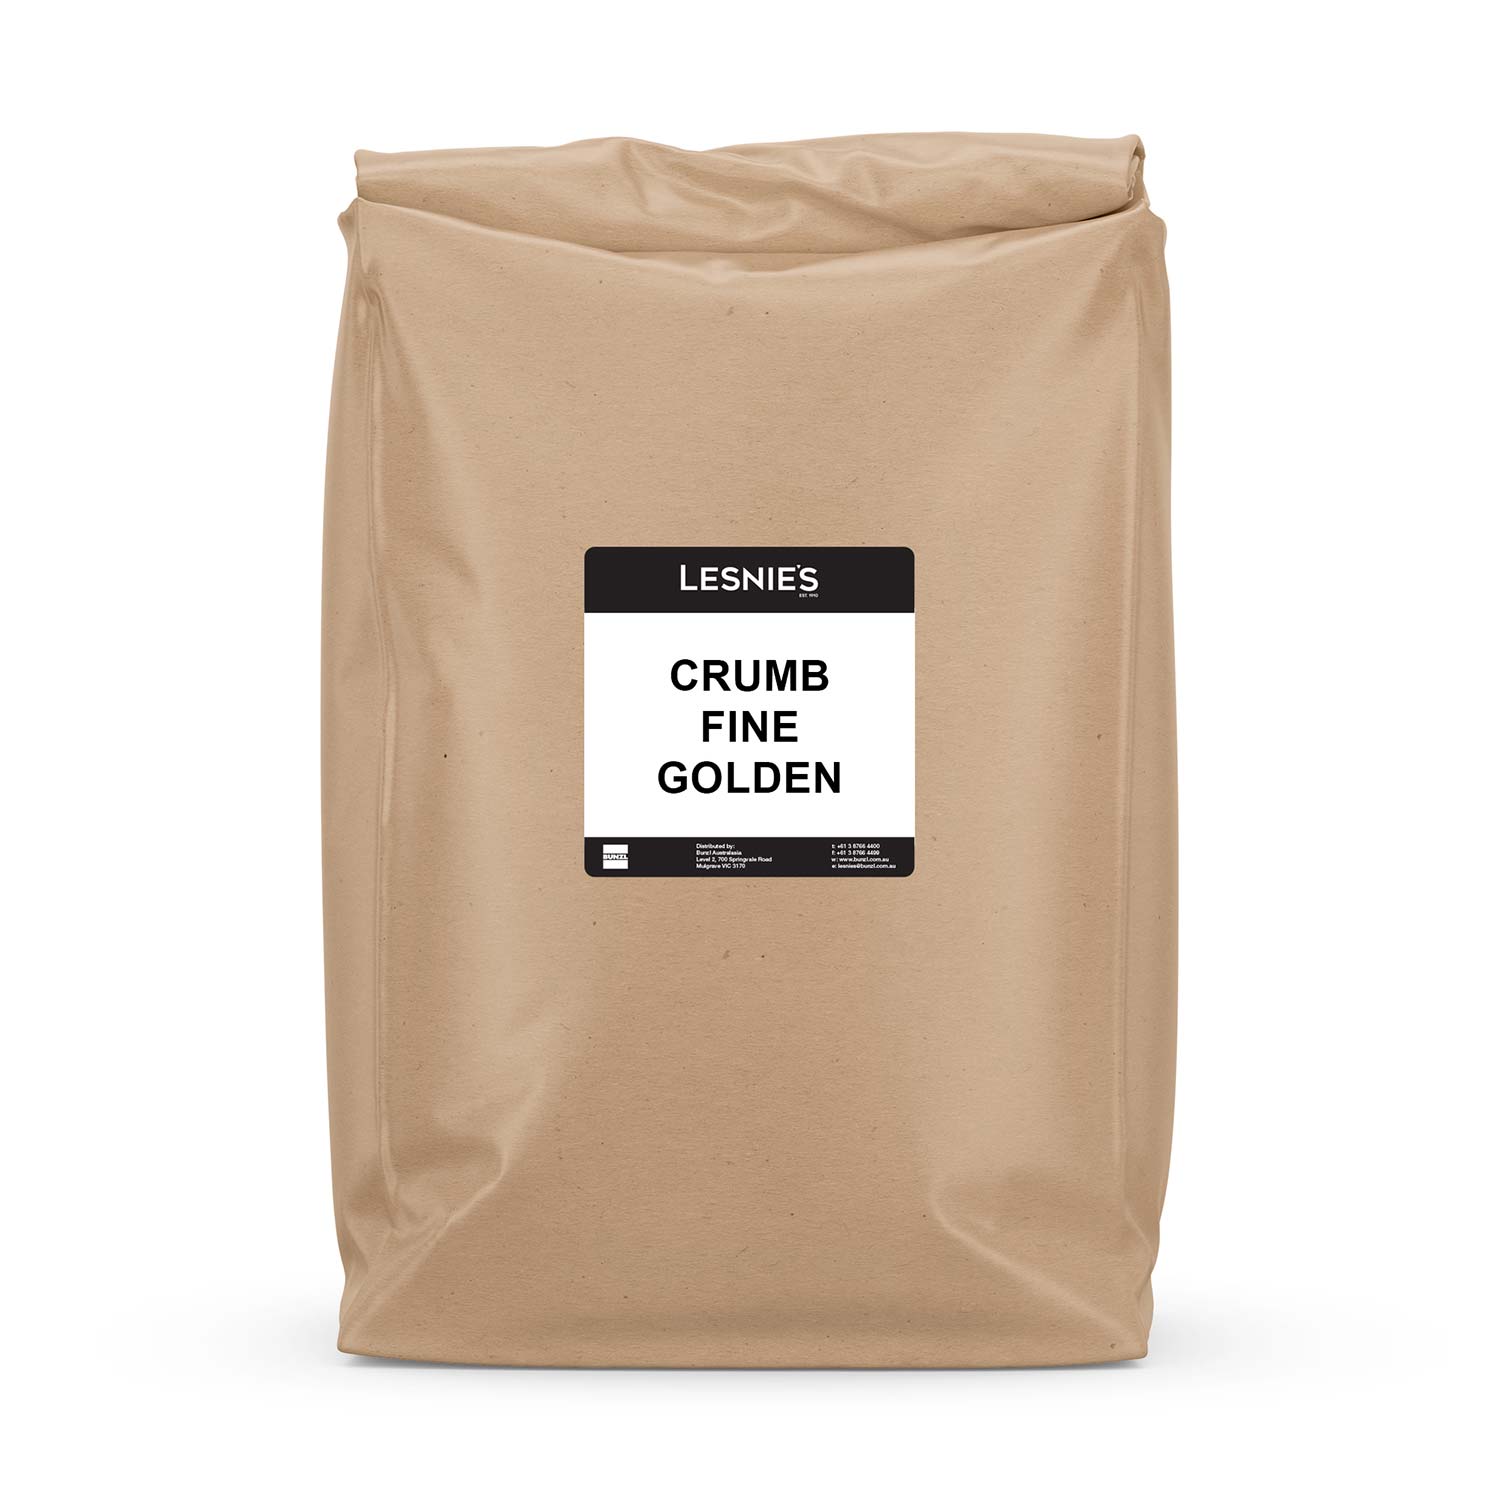 Lesnies Crumb Fine Golden 10kg Cooking Ingredients And Sauces  